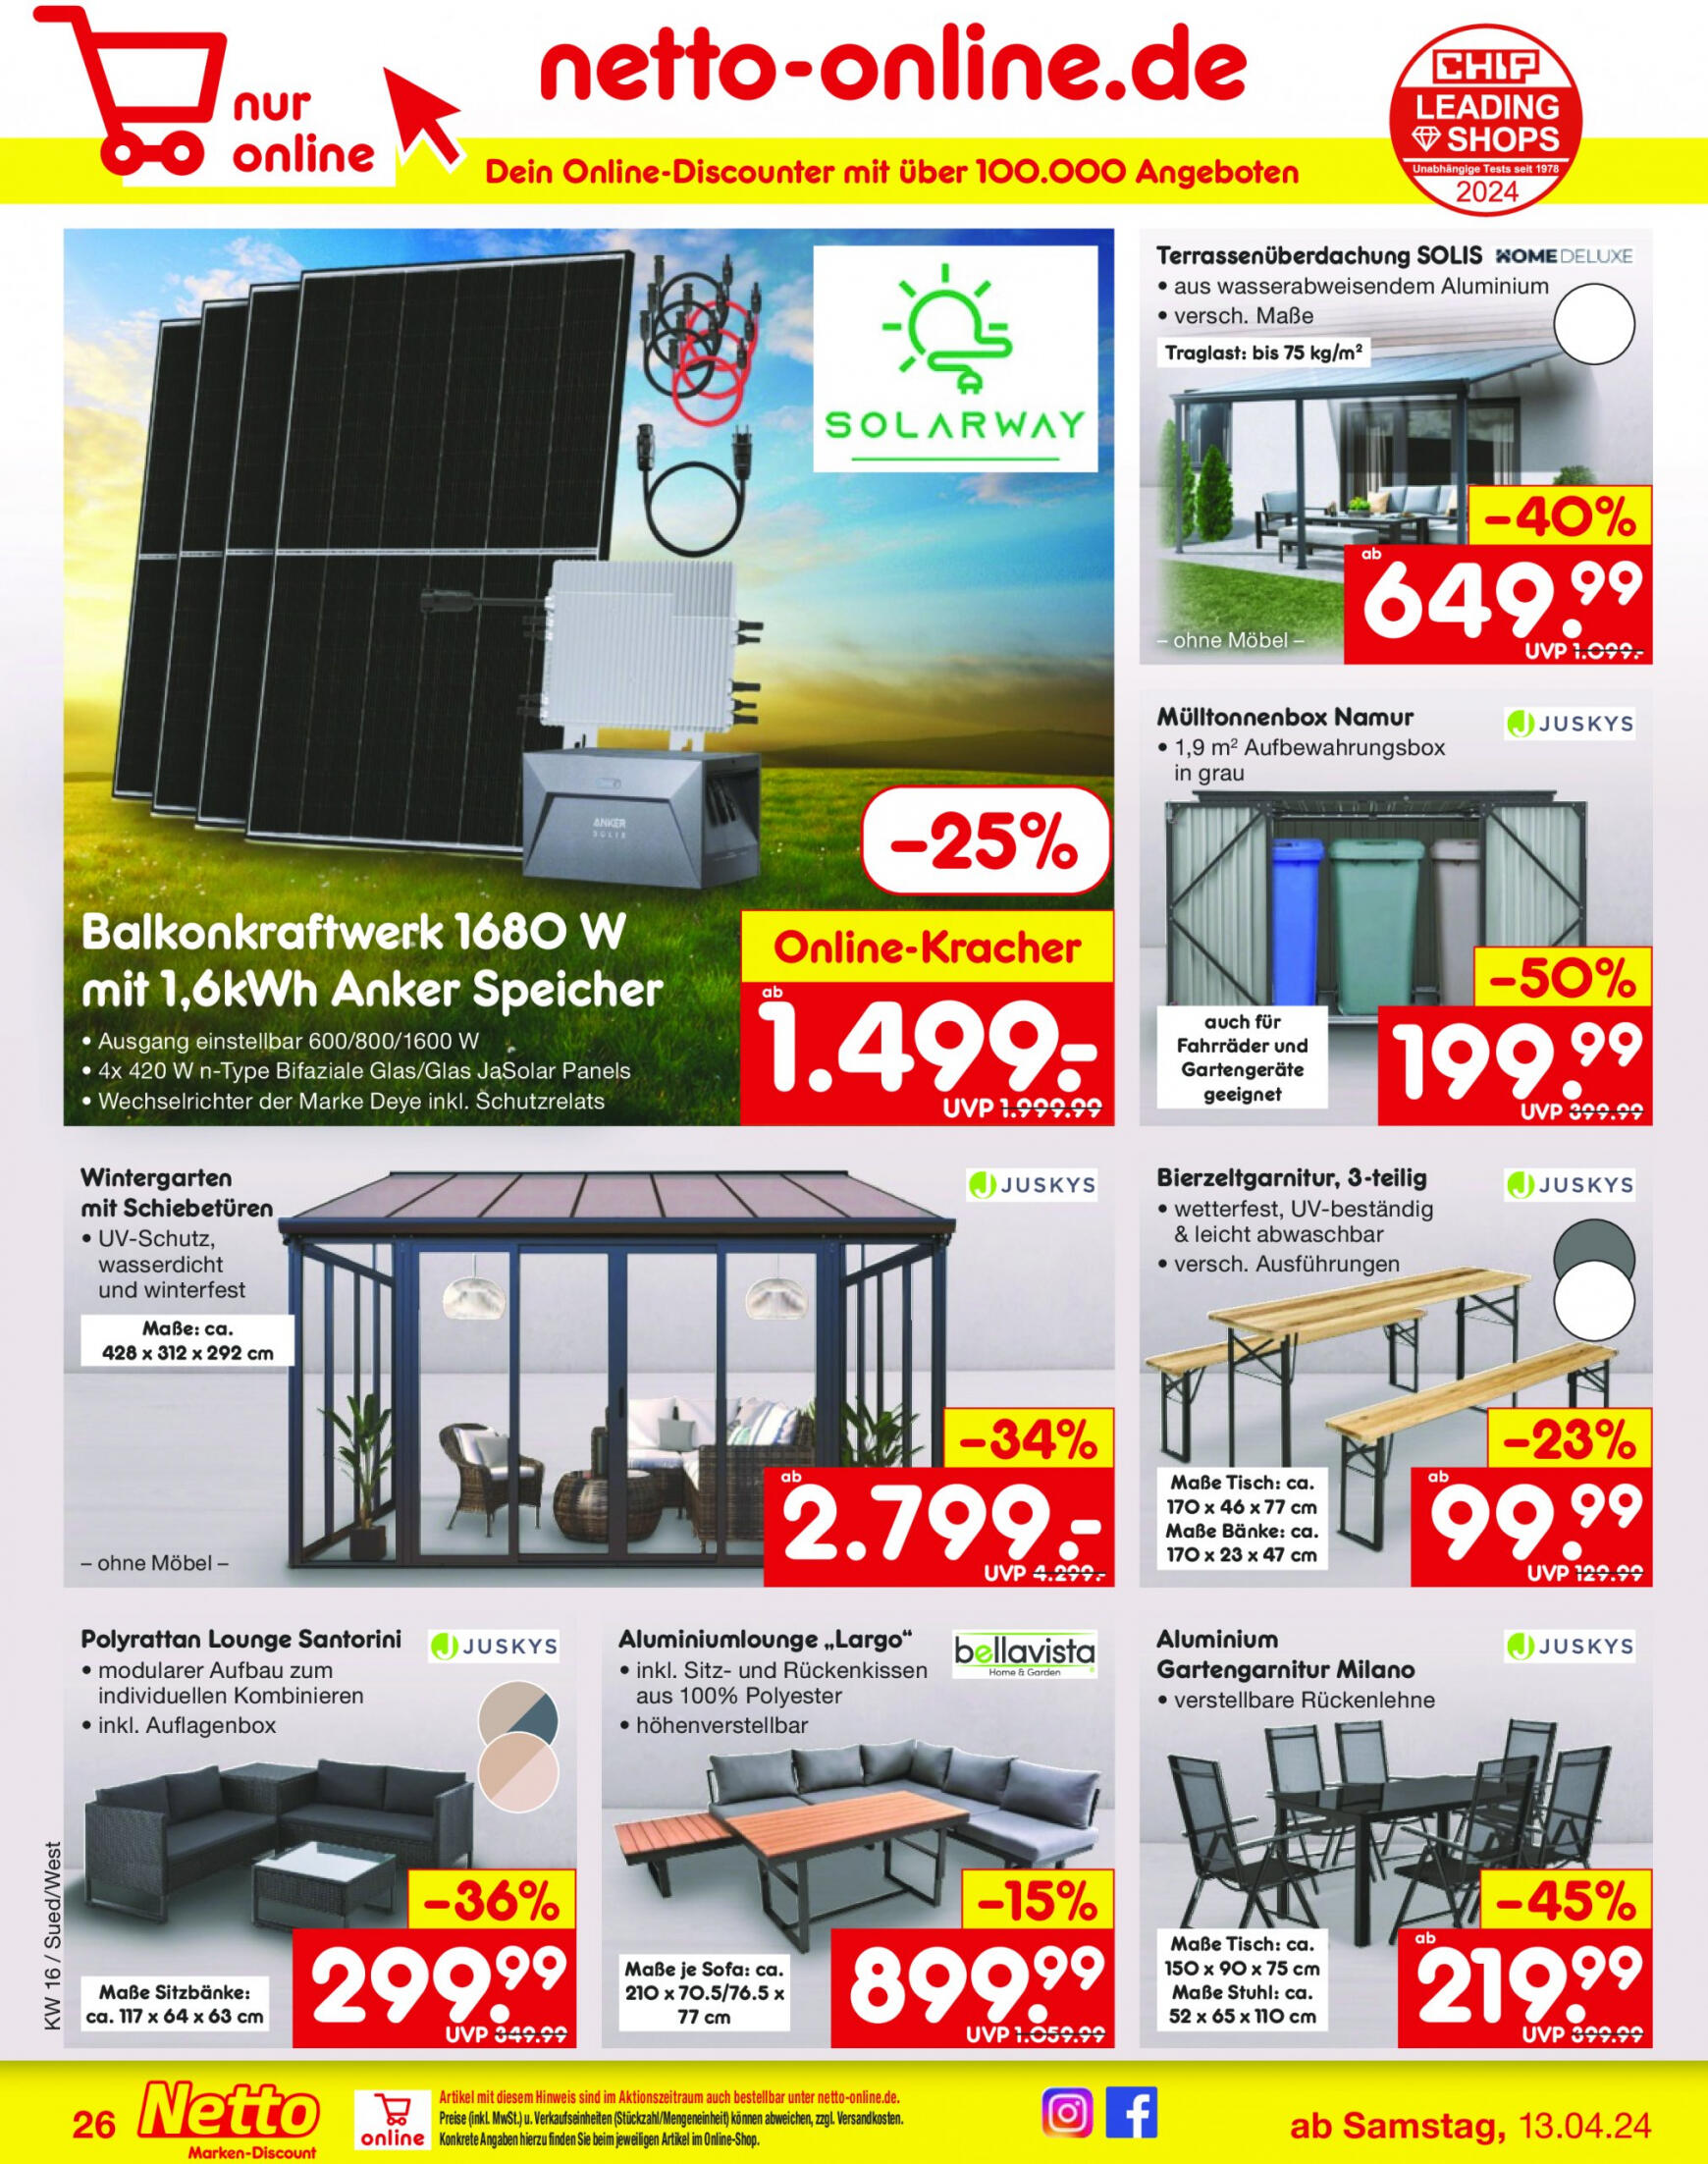 netto - Flyer Netto aktuell 15.04. - 20.04. - page: 32